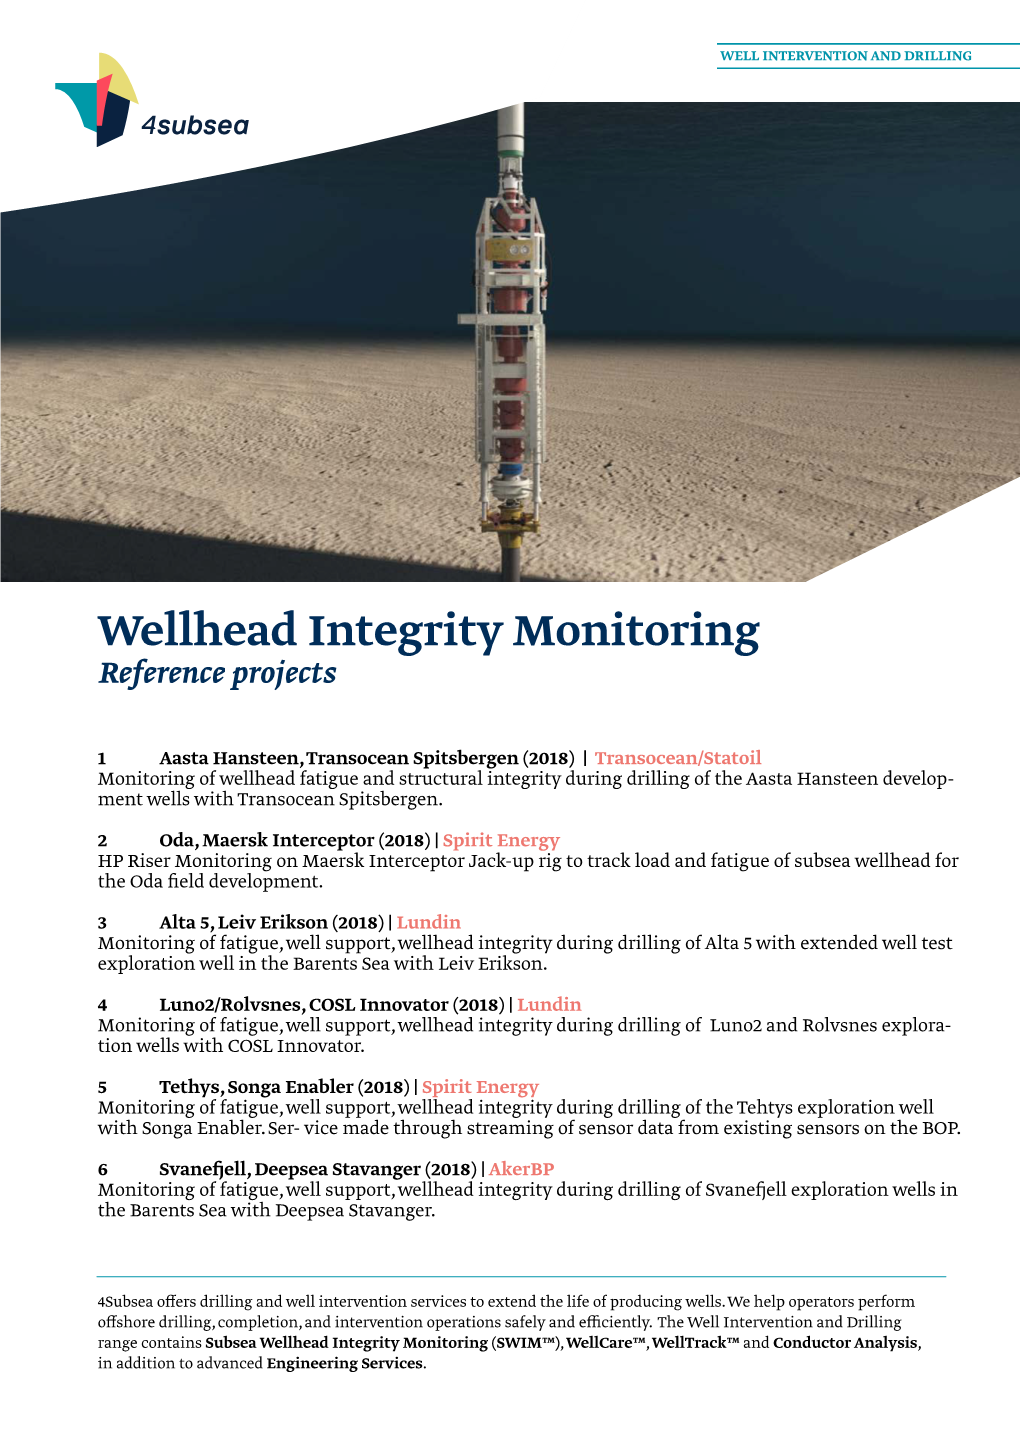 Wellhead Integrity Monitoring Reference Projects